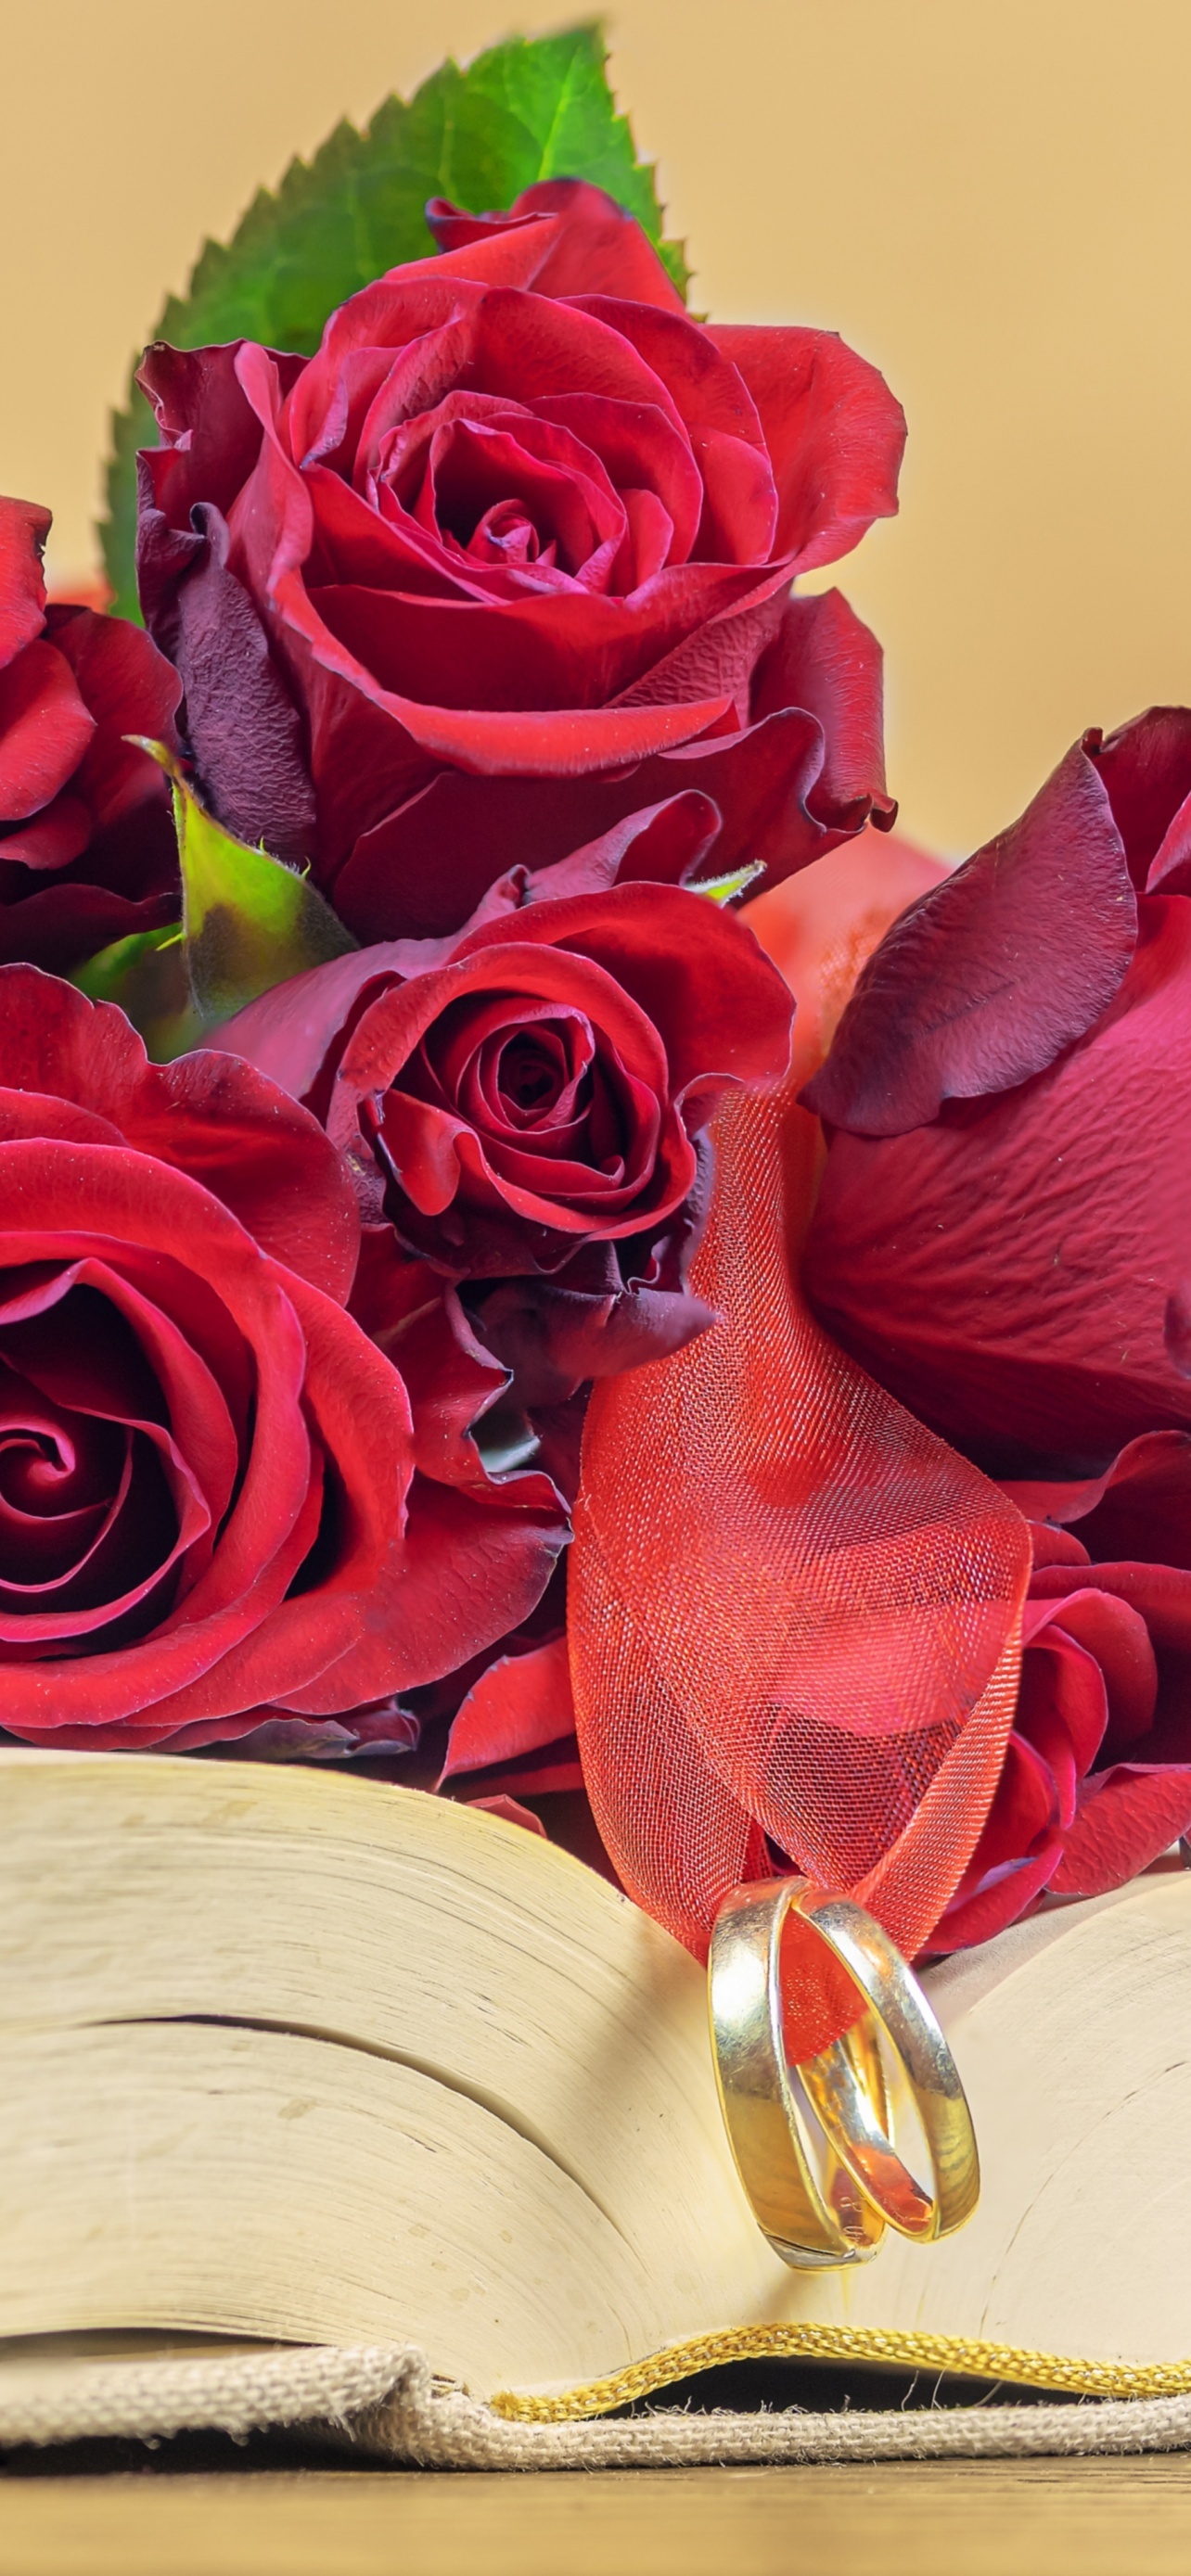 Romantic red roses, Wedding ring symbolism, Valentine's Day gift idea, Floral beauty, 1290x2780 HD Phone